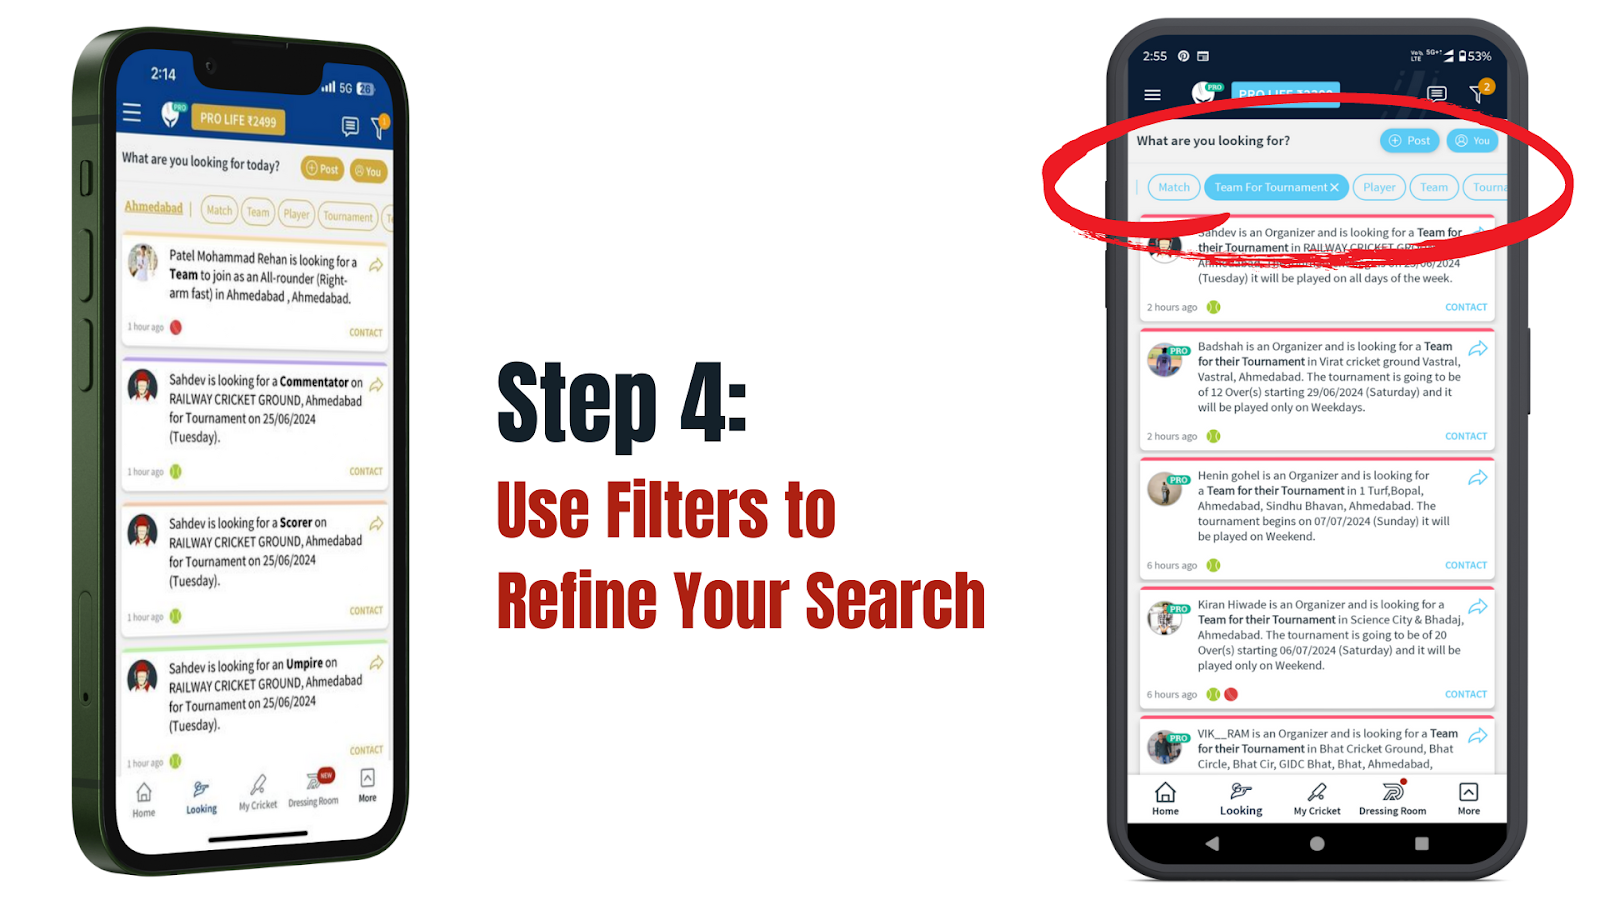 Use Filters to Refine Your Search